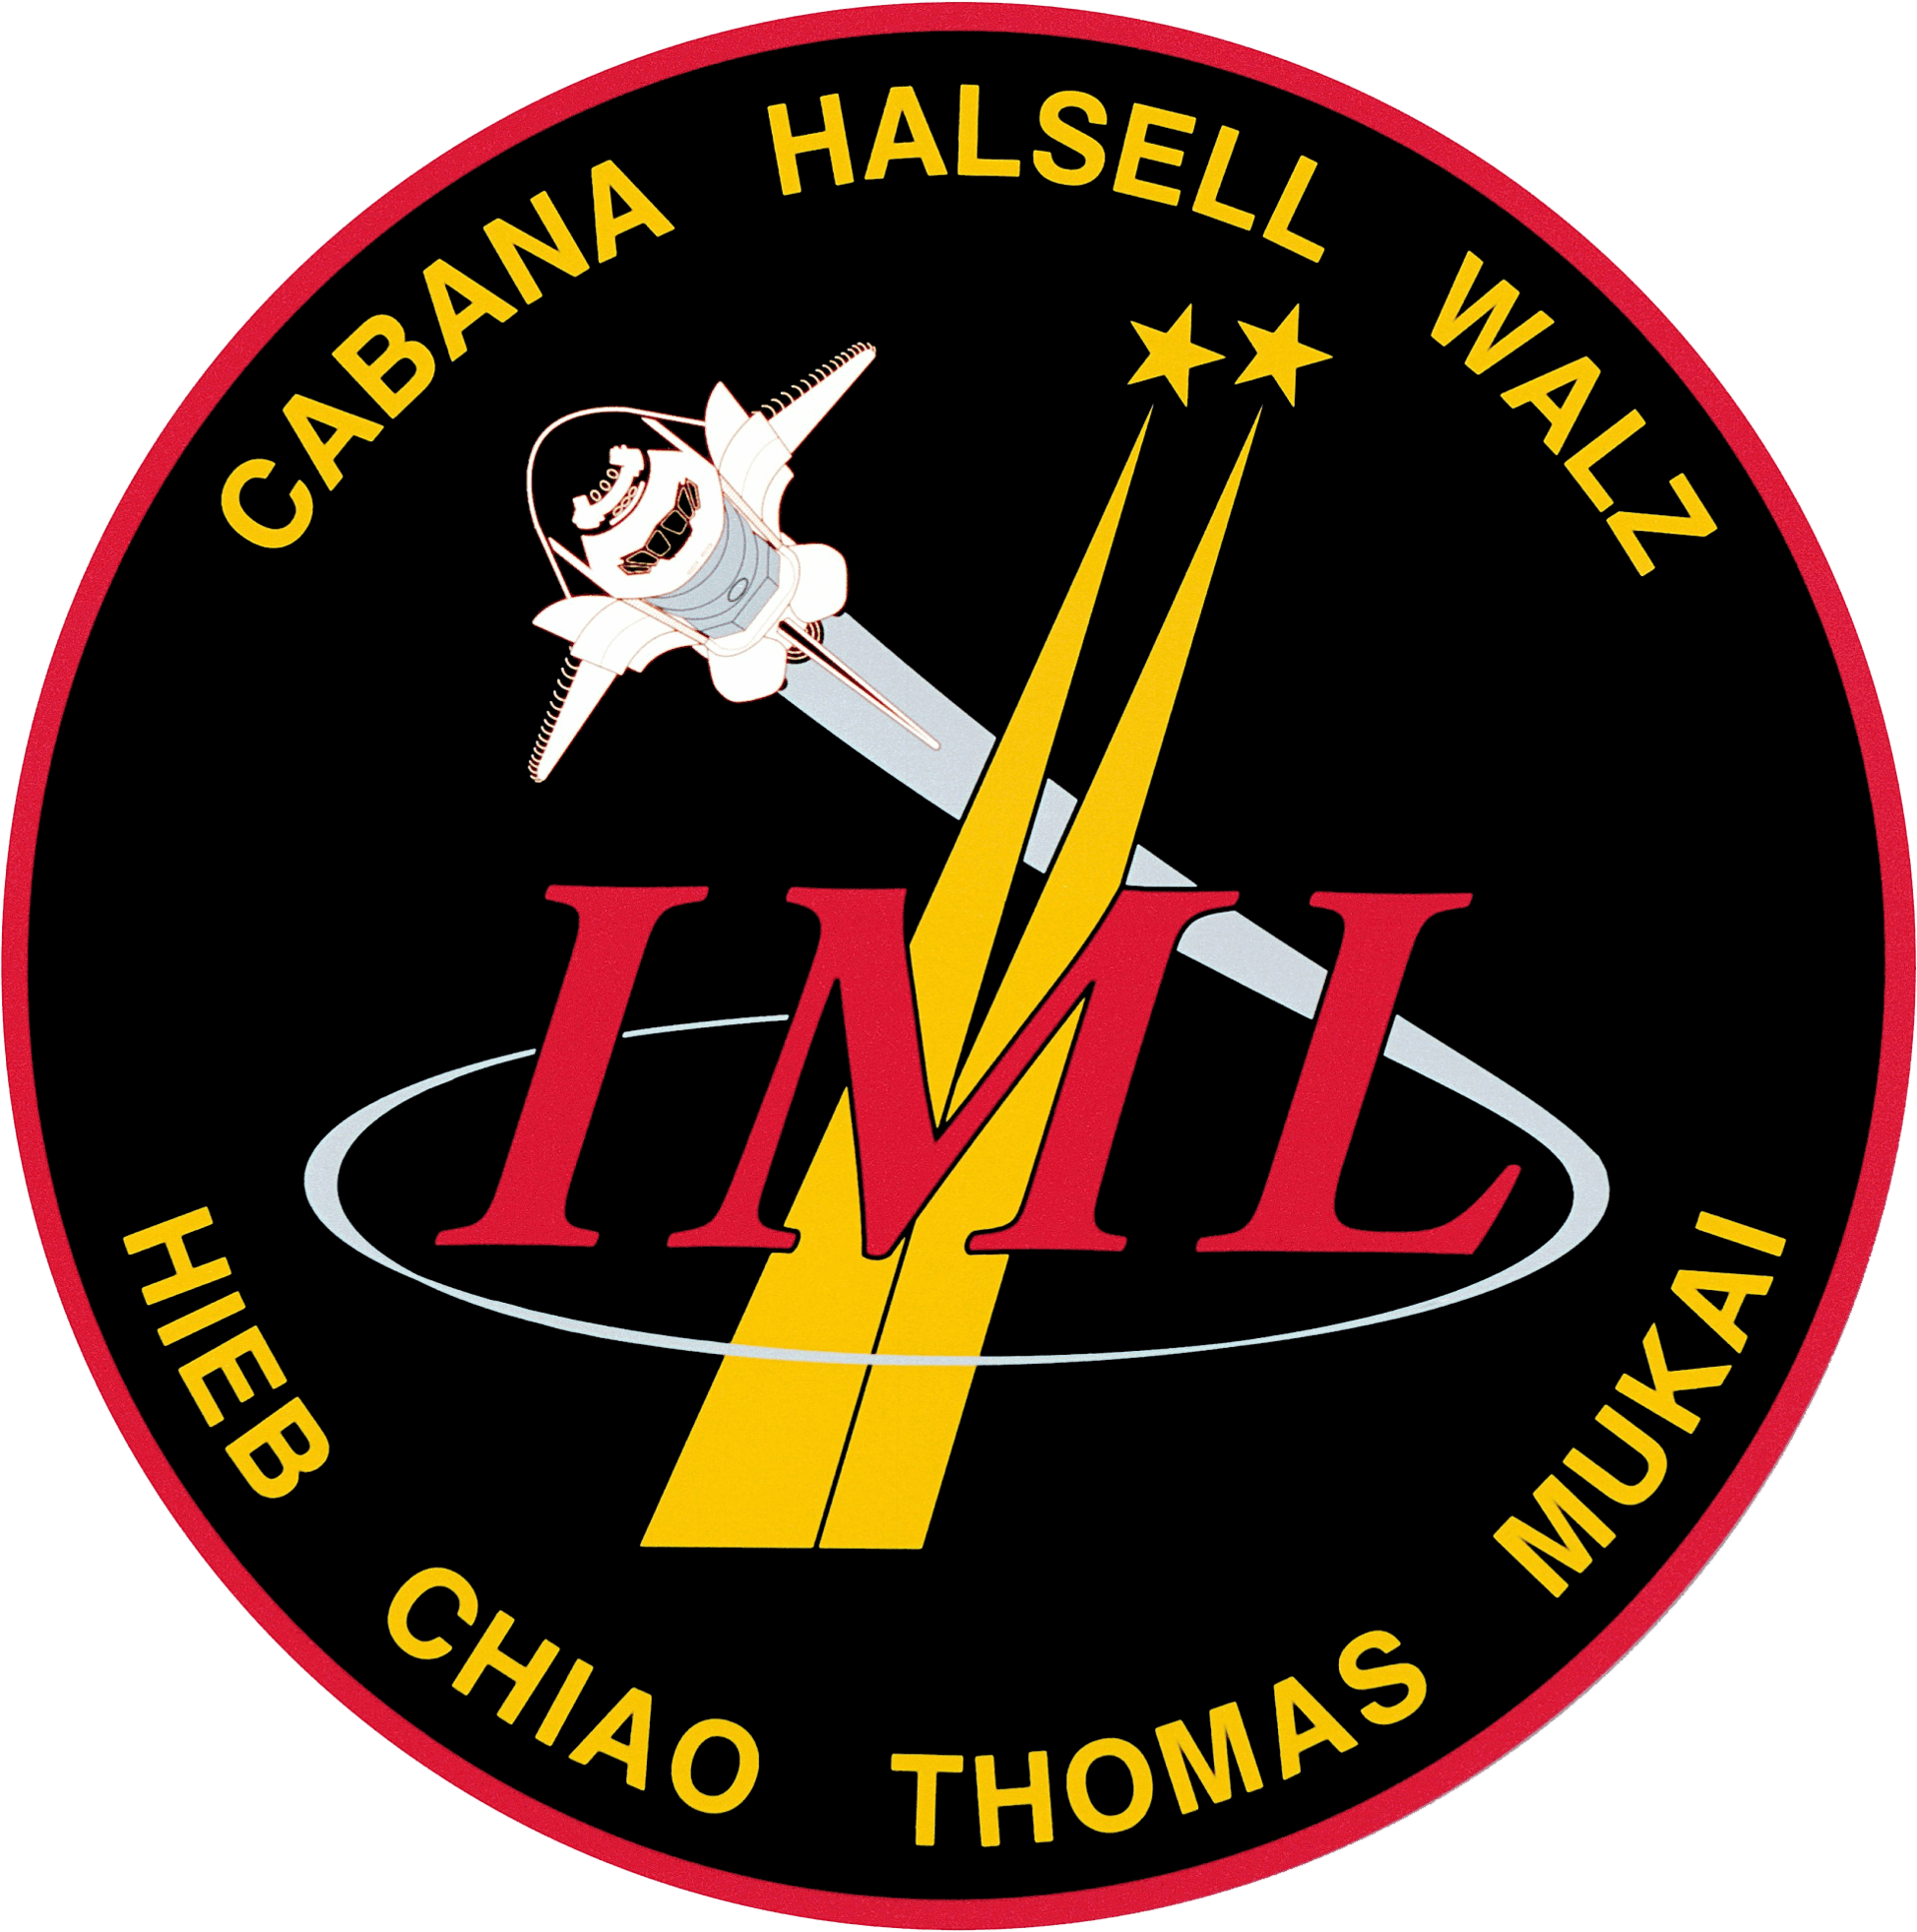 Mission patch for STS-65